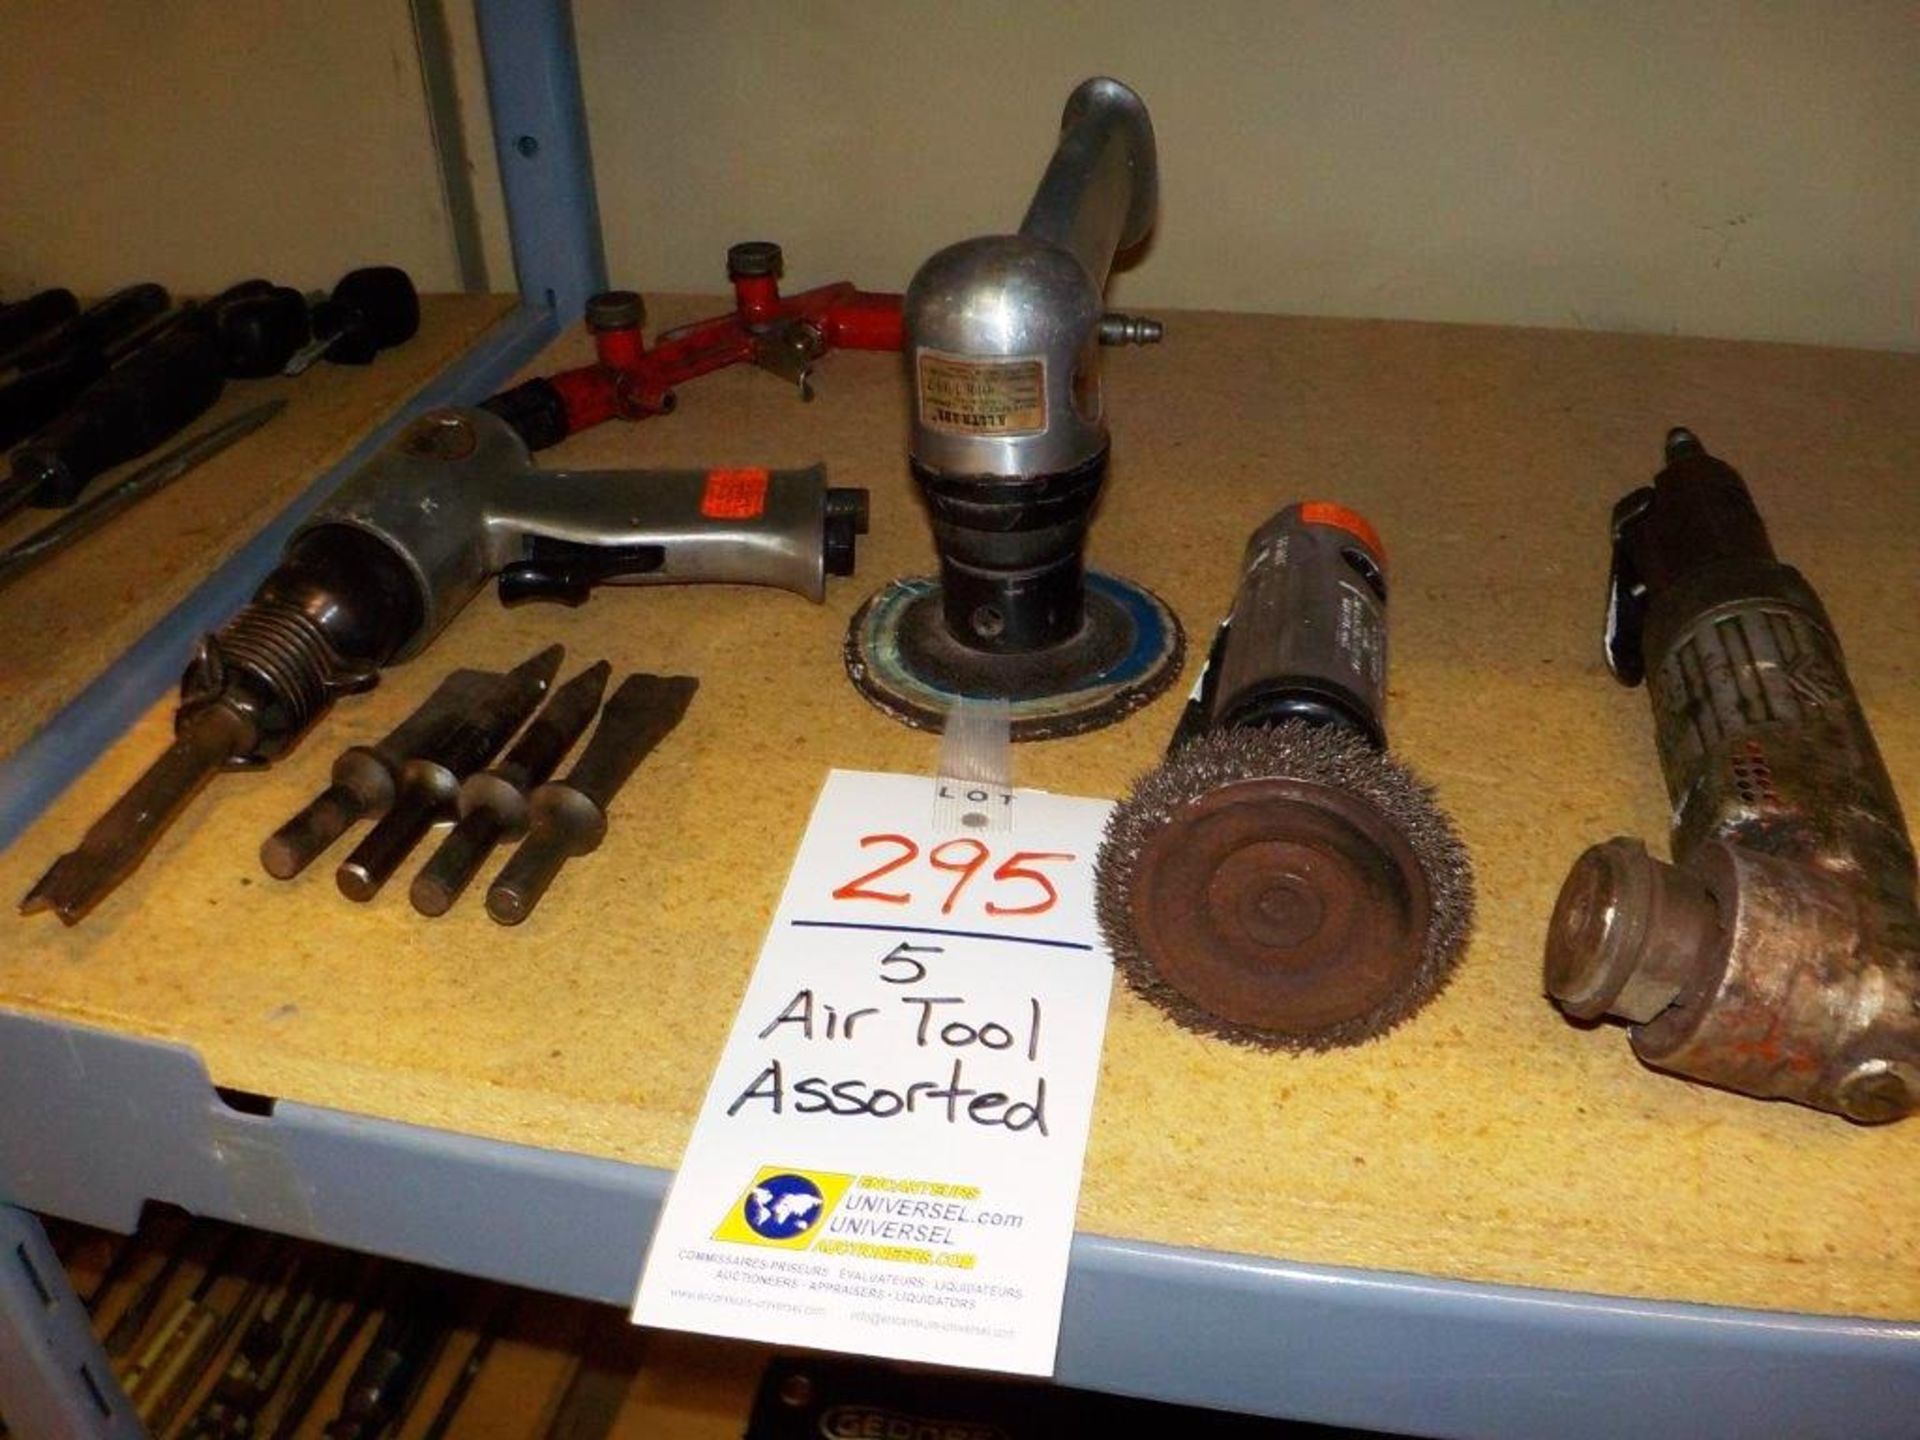 AIR TOOL ASSORTED